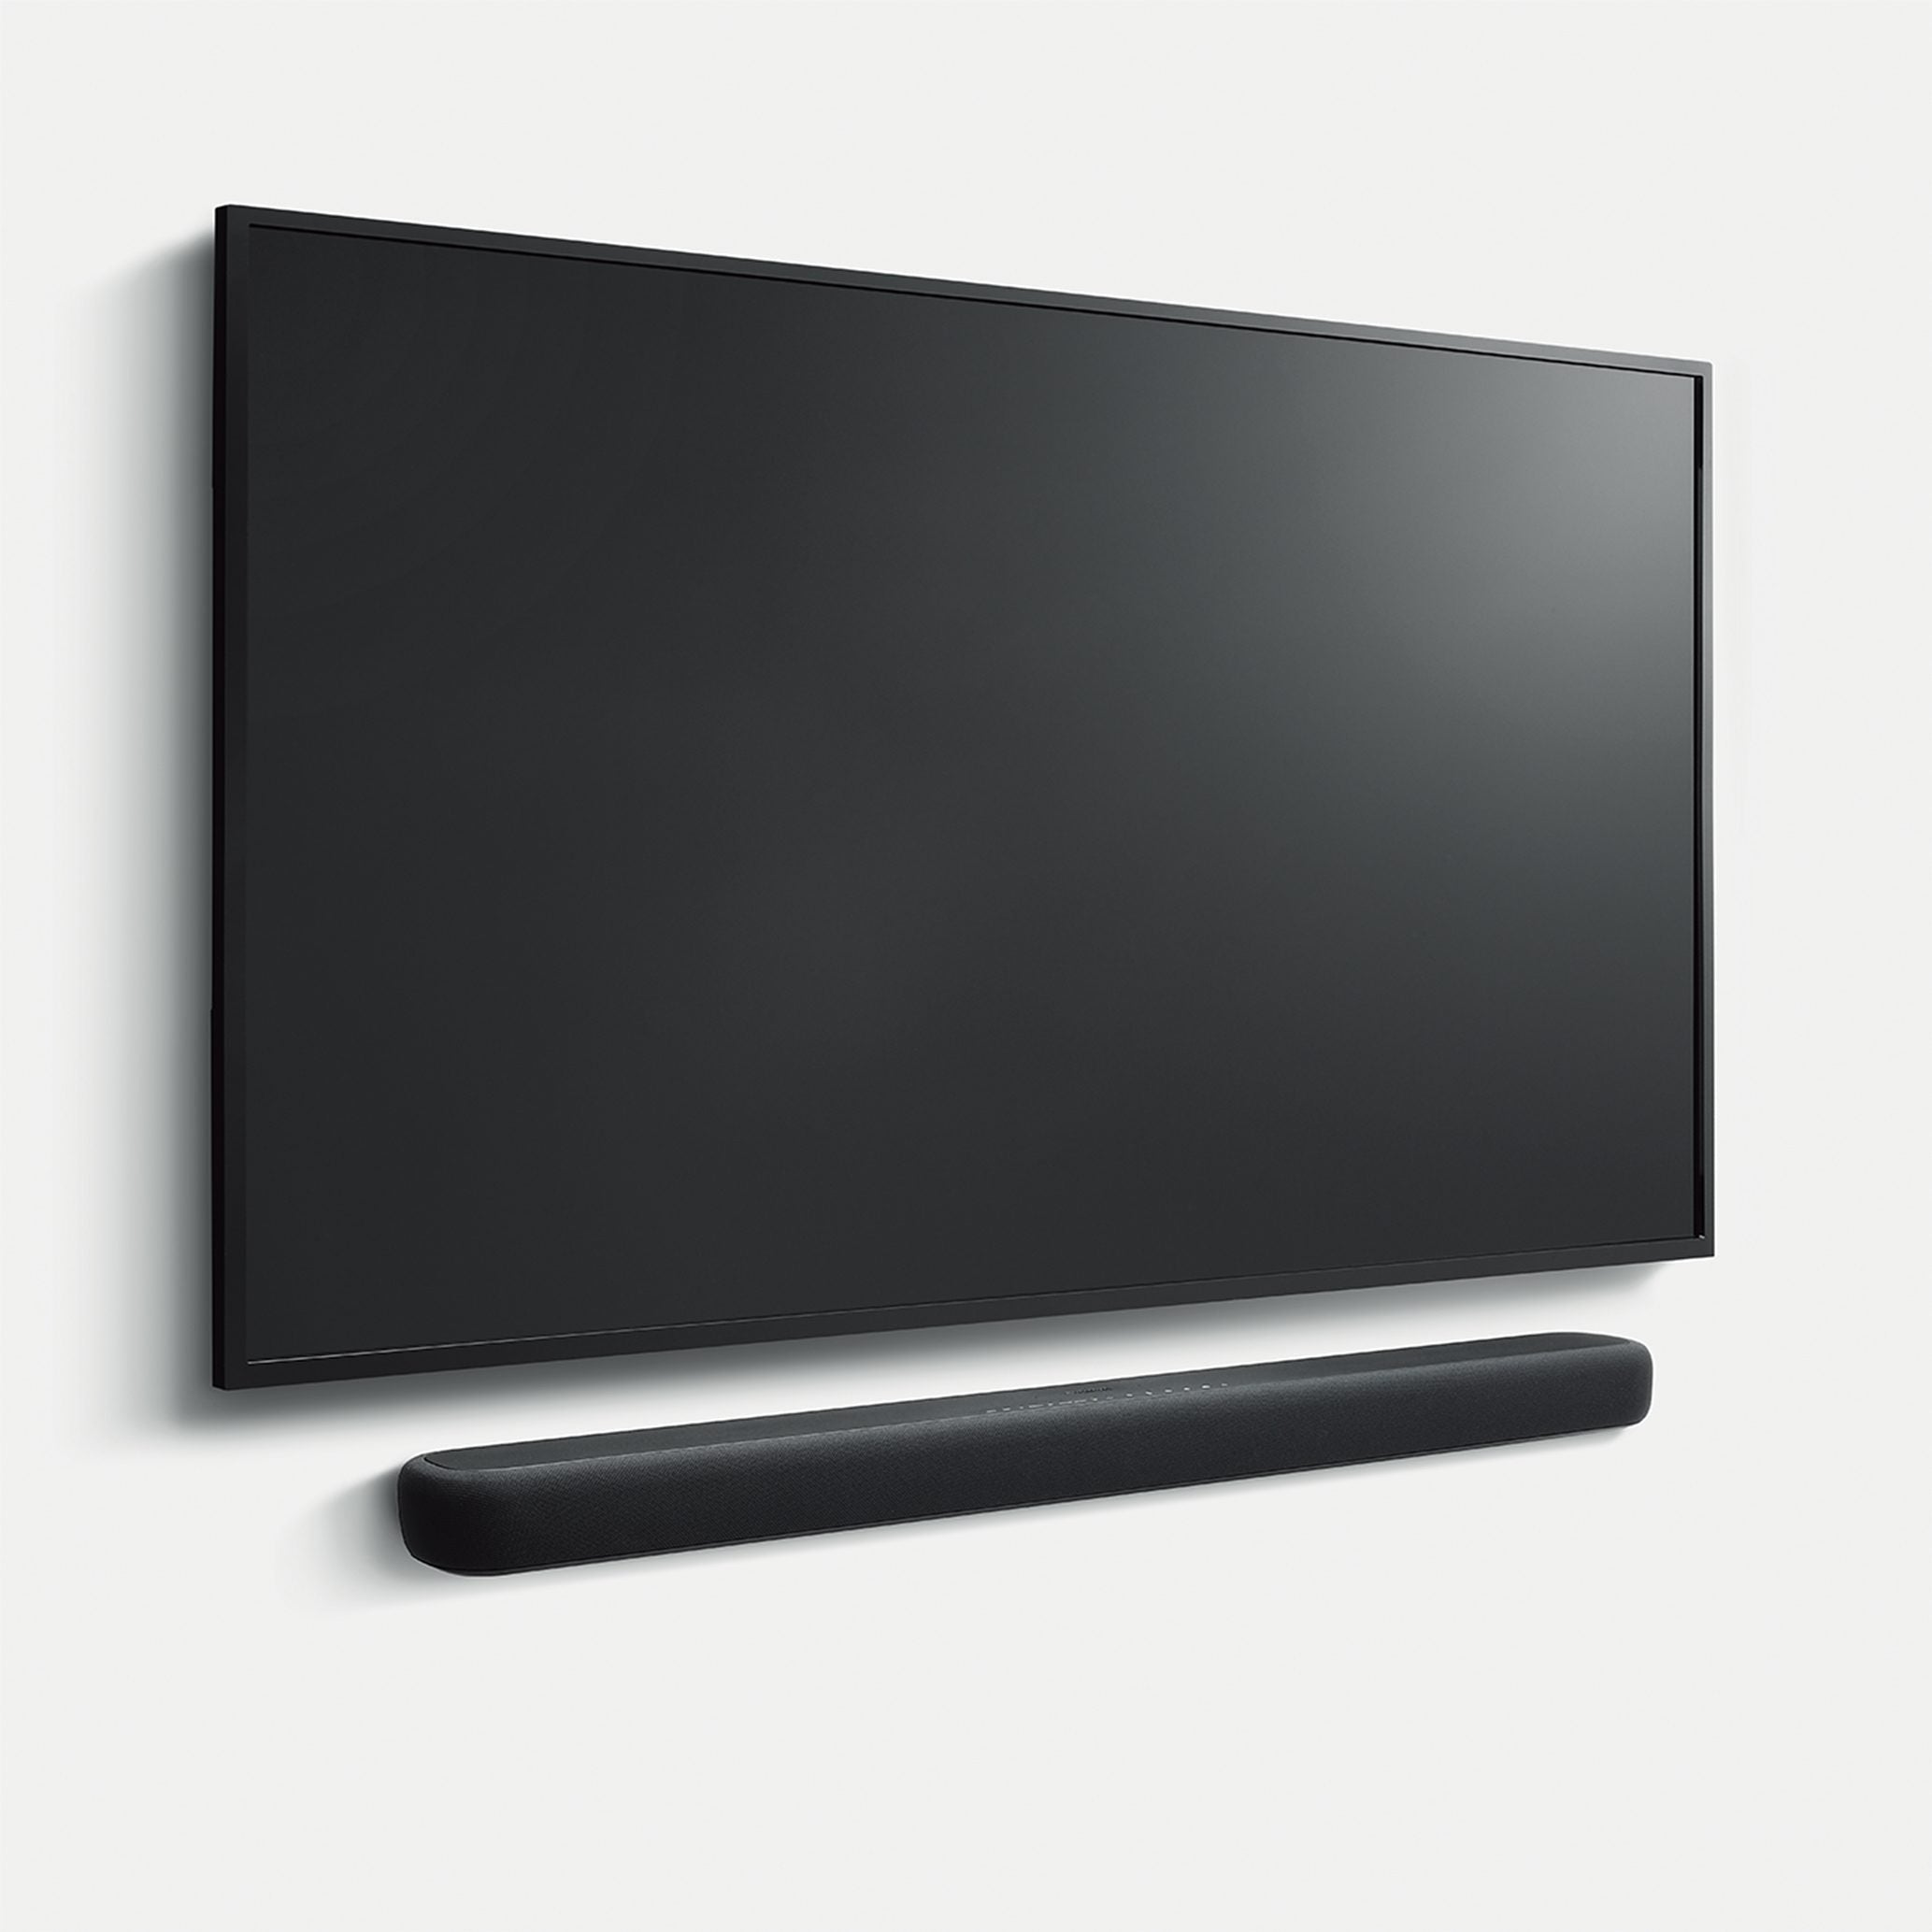 YAMAHA YAS 209 Soundbar with Wireless Subwoofer, Bluetooth and Alexa Voice Control Built in